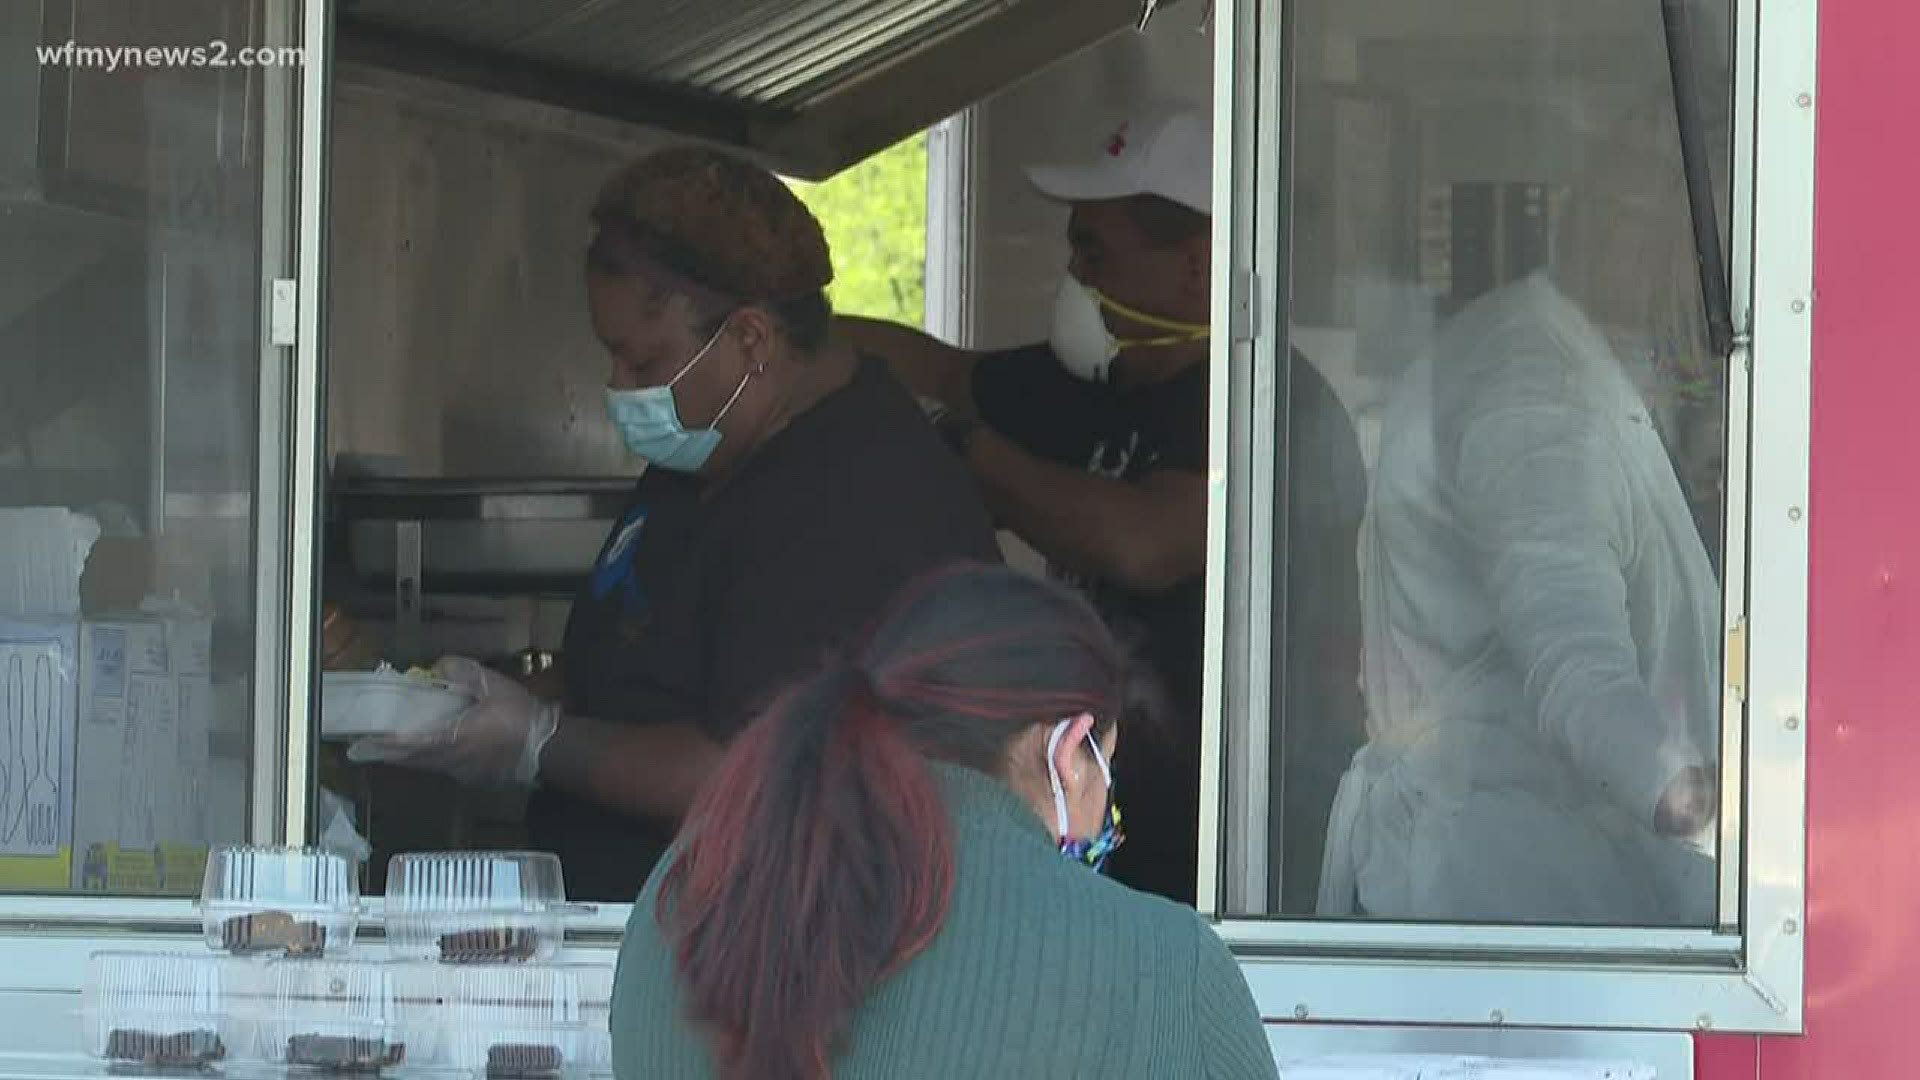 Seafood Destiny offers free meals to workers in cosmetology field. The restaurant plans to feed postal and social workers, and truck drivers, next.